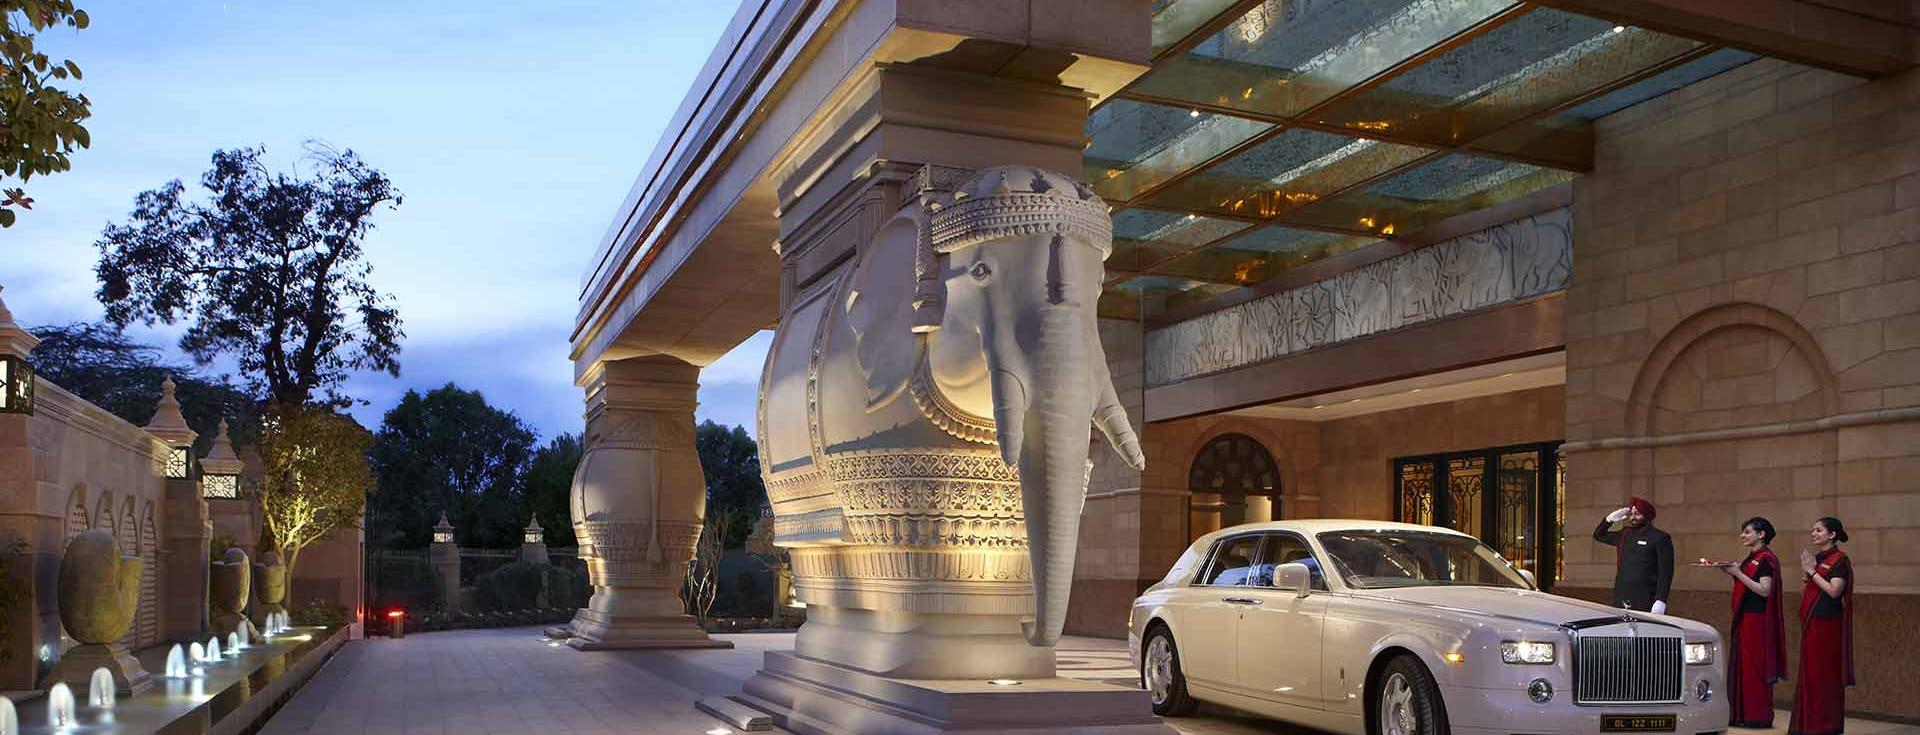 SWANKY NEW BMW FLEET CHECKS IN AT THE LEELA PALACES, HOTELS AND RESORTS